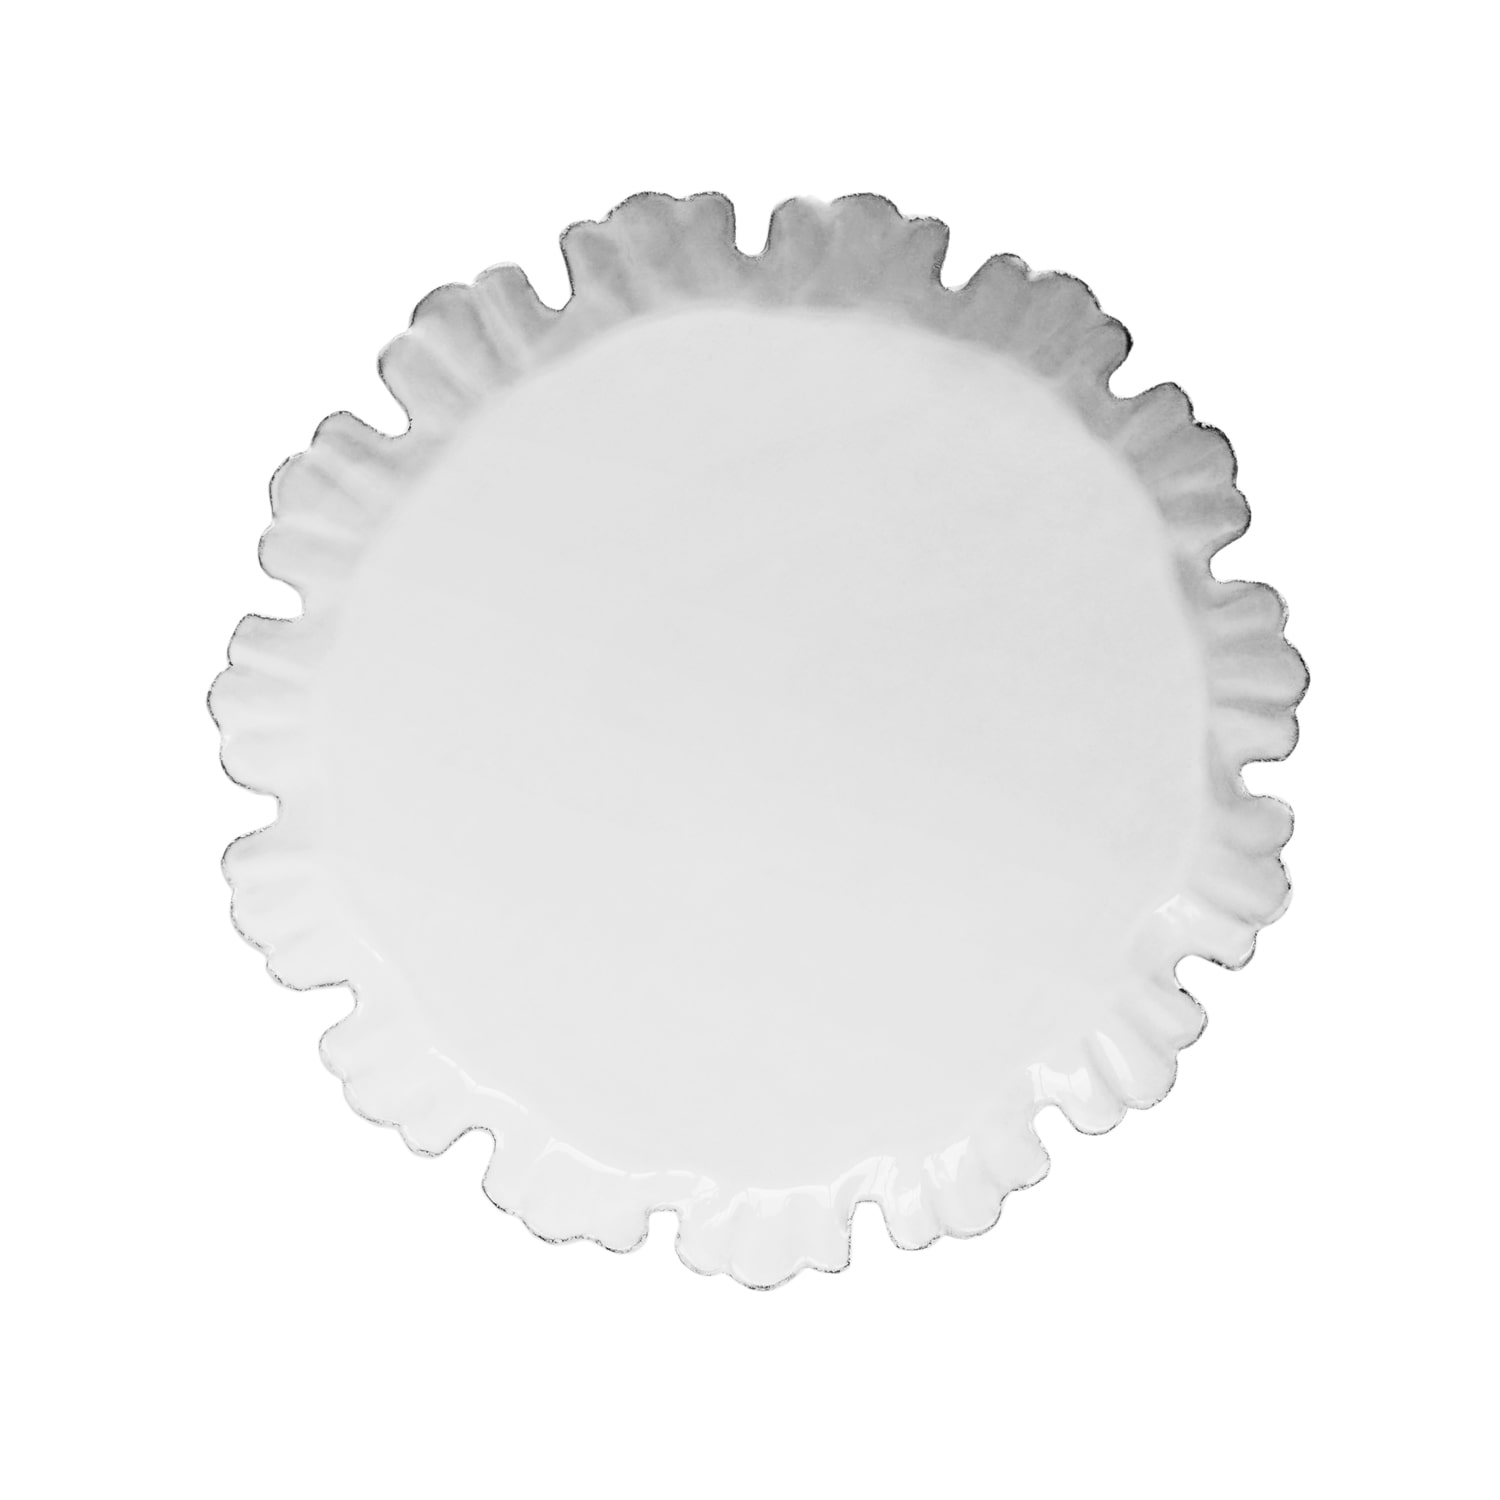 [Chou] Dinner Plate with 15 Petals